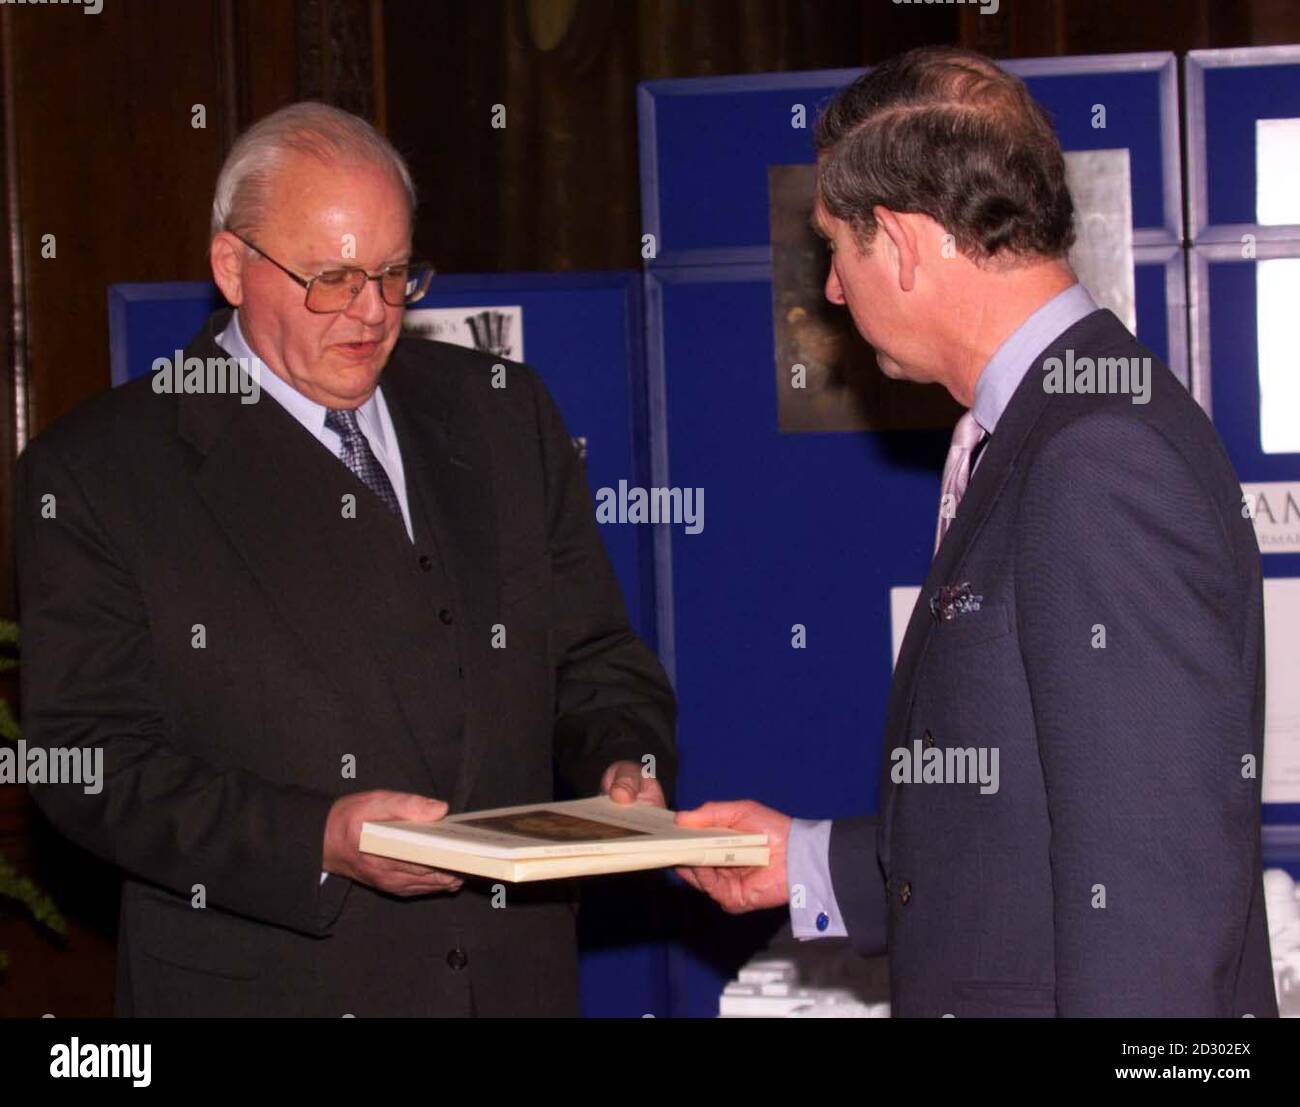 The Prince of Wales presents President Herzog of Germany with a copy of the report of the Prince's Potsdam Project, at the Palace of Holyroodhouse in Edinburgh today, December 2, 1998 during his four-day official state visit to the UK. The Potsdam Project is of international significance and is engaged in the study of urban development in a Europe-wide context.  WPA ROTA photo by Chris Bacon/PA Stock Photo